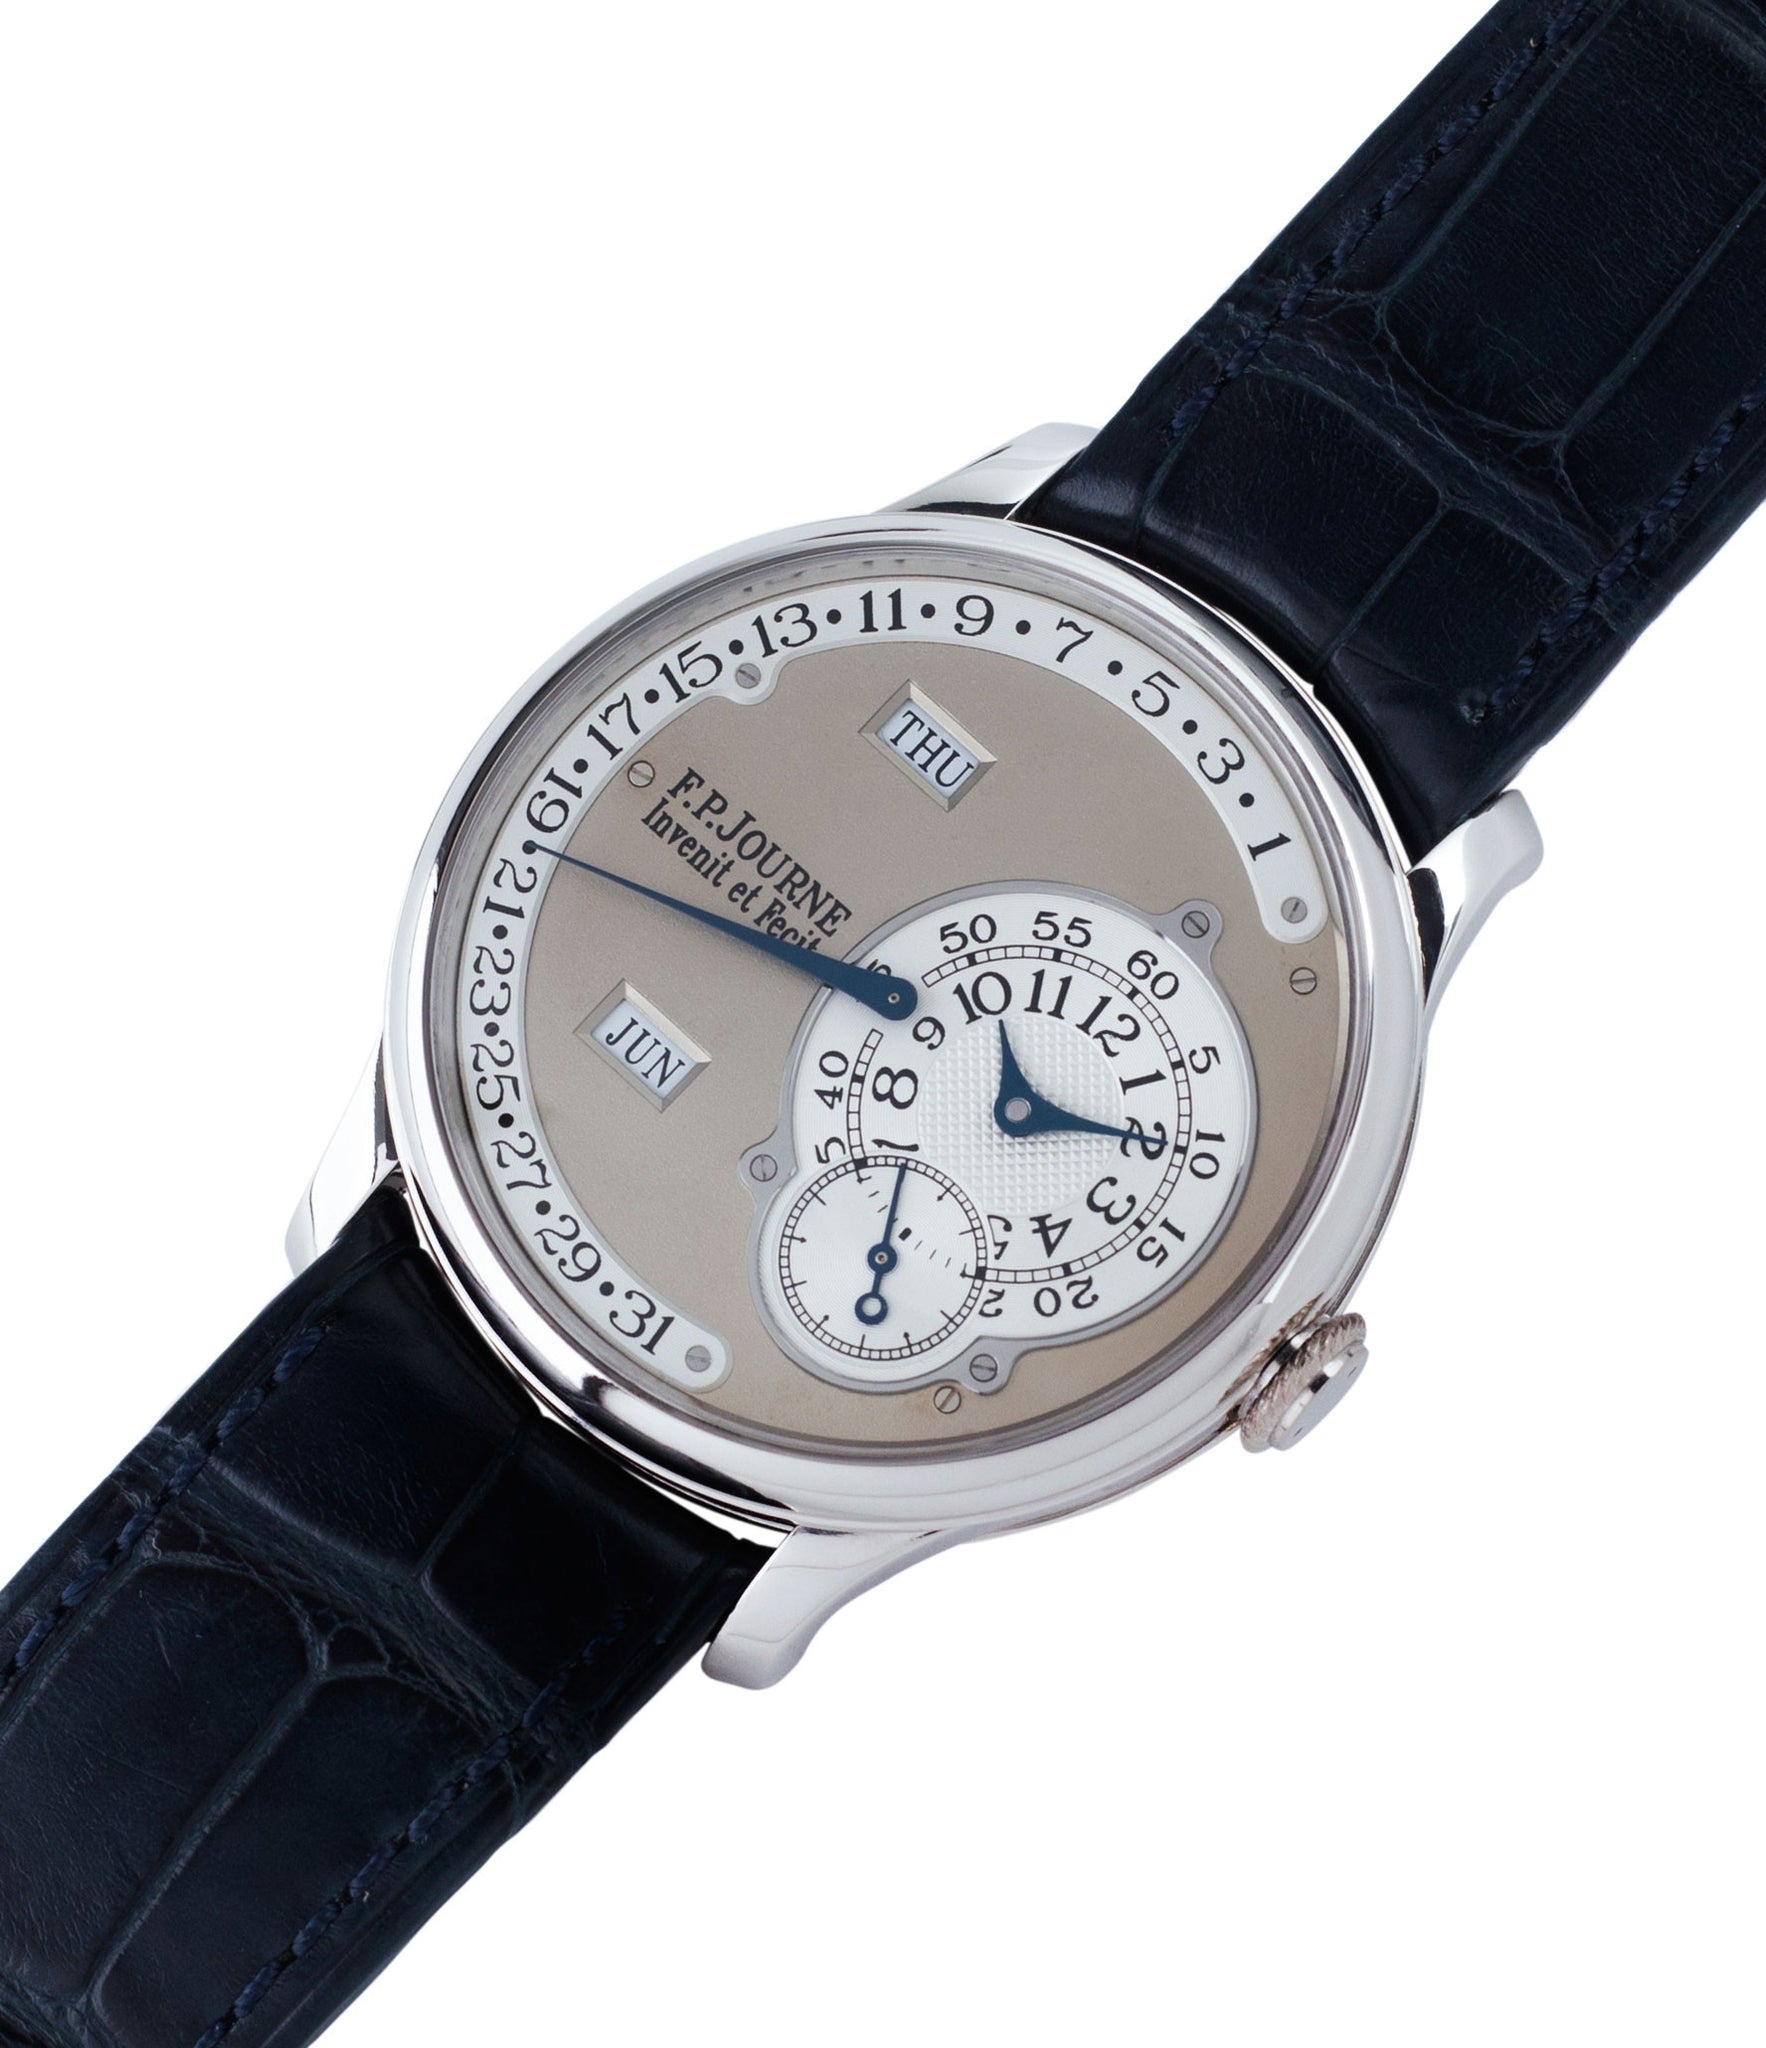 buy preowned F. P. Journe Octa Calendrier early brass movement 38mm platinum full set dress luxury watch for sale online at A Collected Man London independent watch specialist